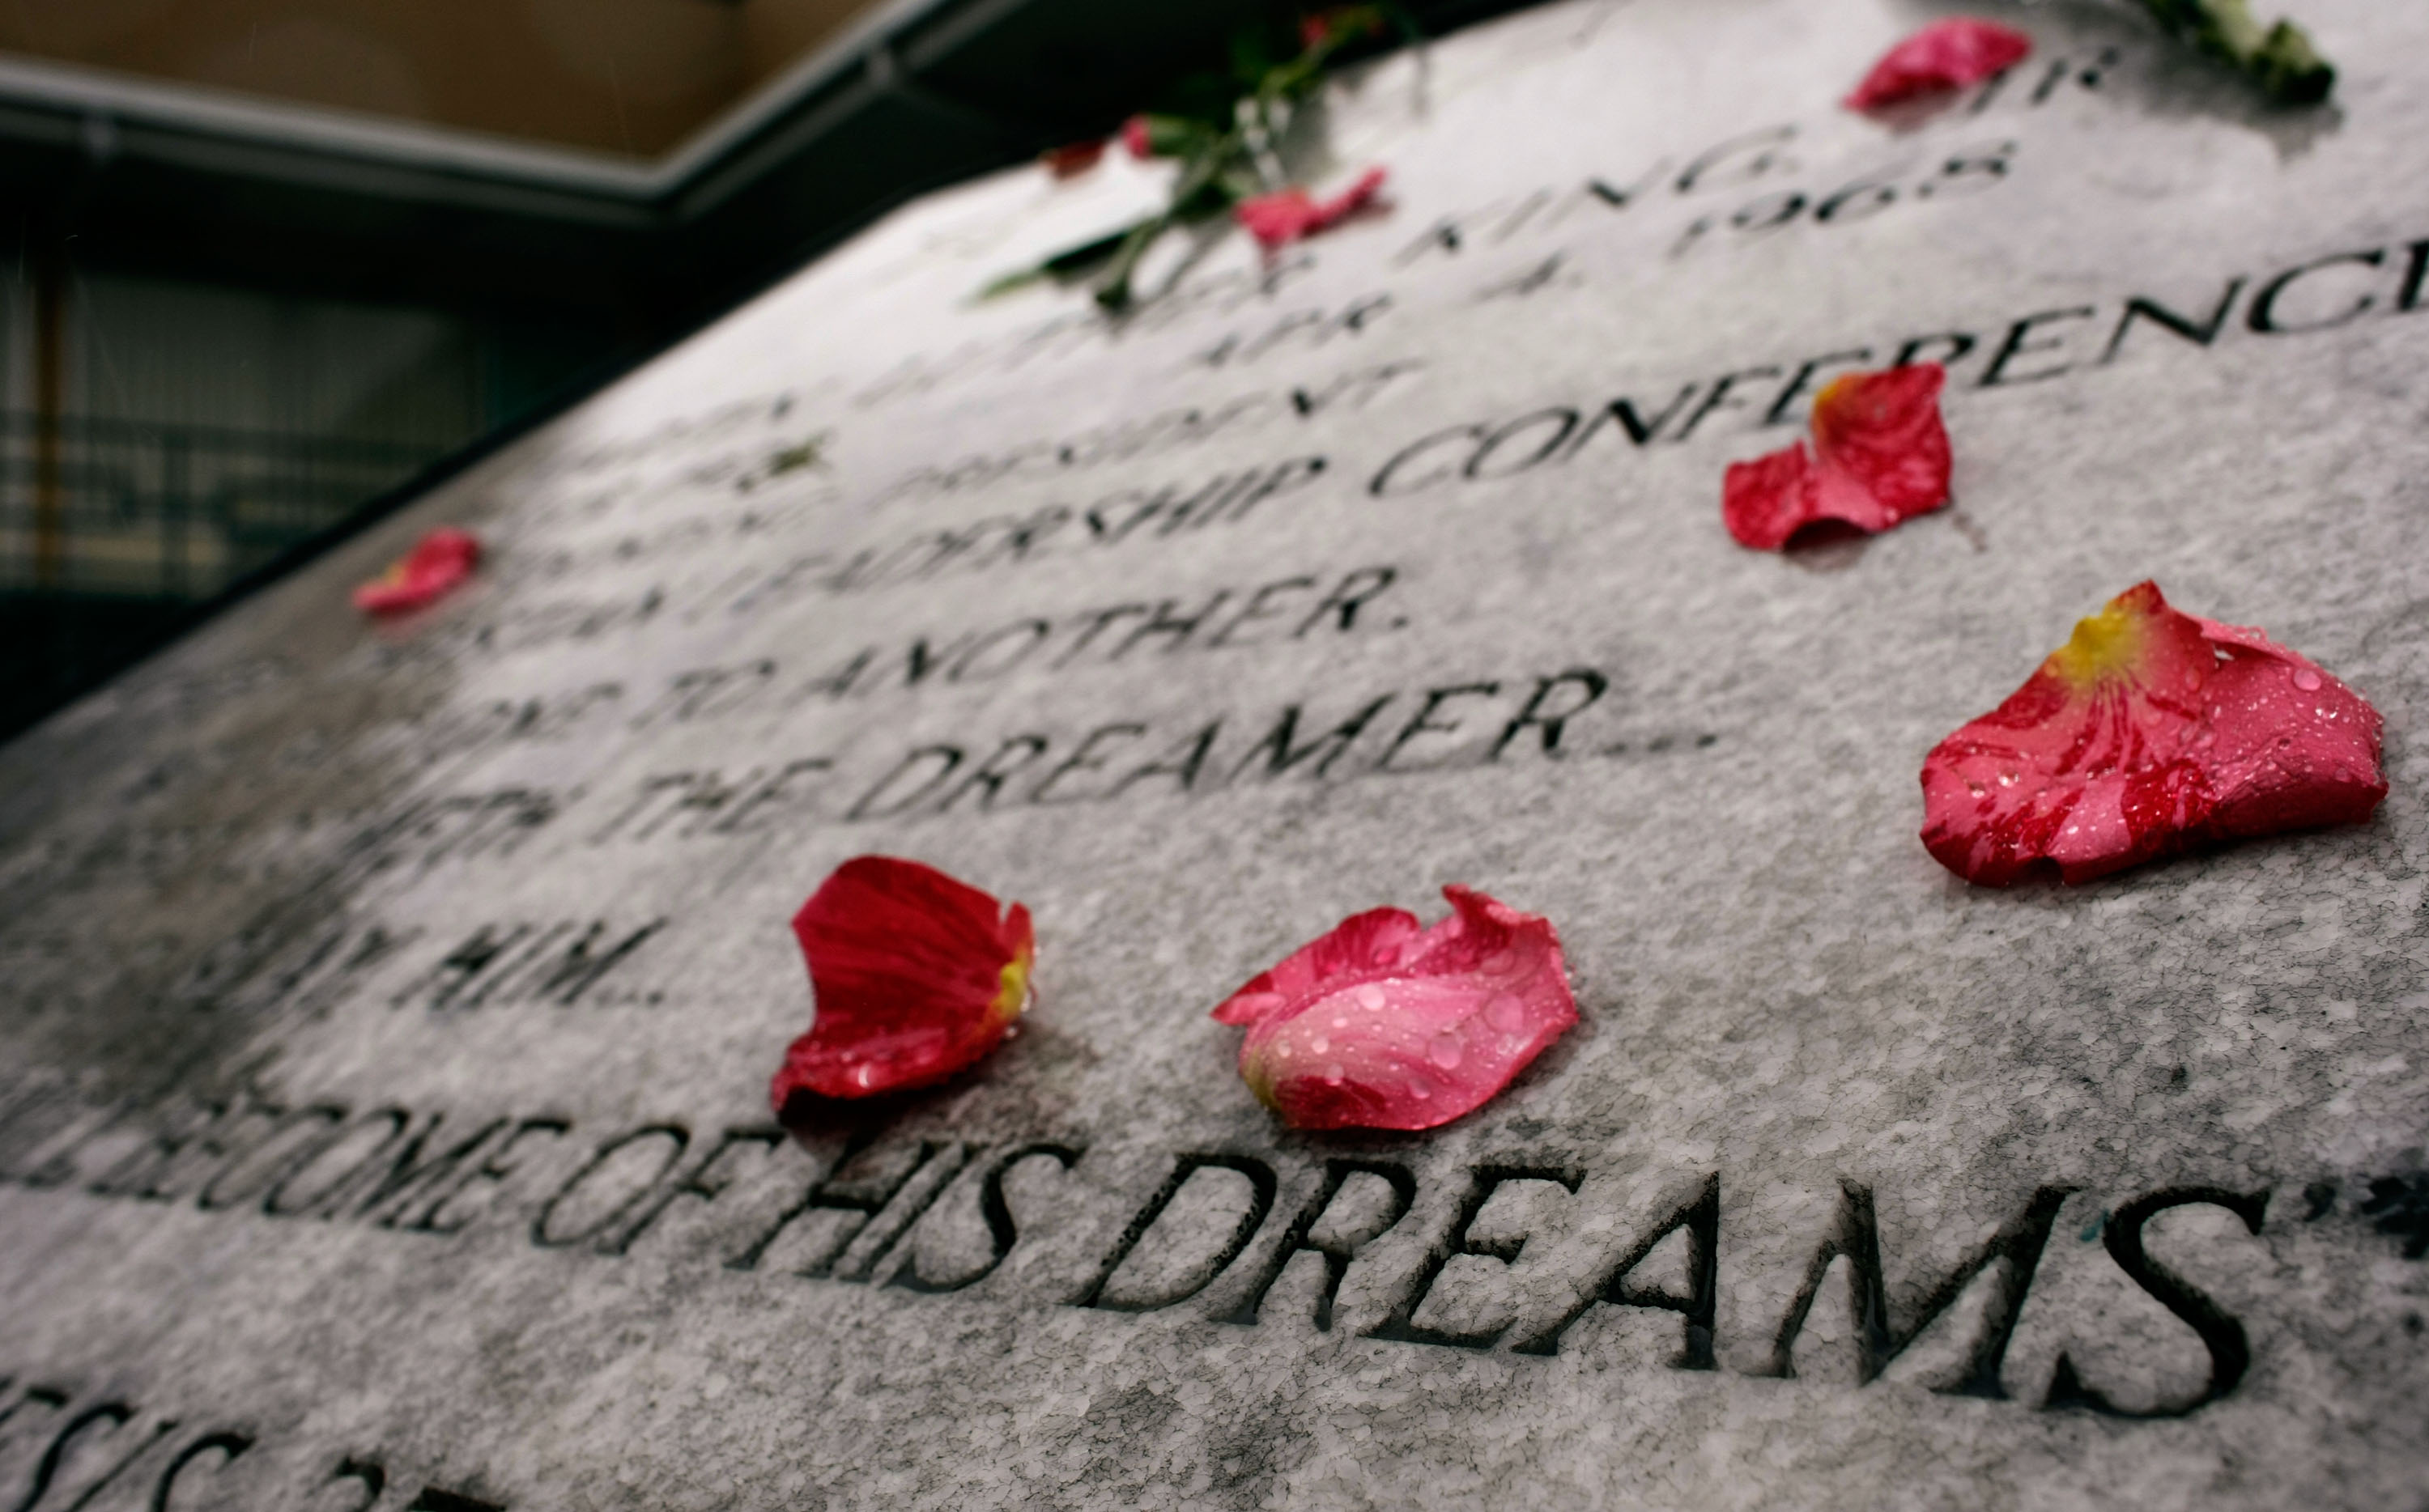  A commemorative plaque honoring Martin Luther King Jr. is covered with flowers outside the Lorraine Hotel, the site where Martin Luther King Jr was assassinated, April 4, 2008 in Memphis, Tennessee